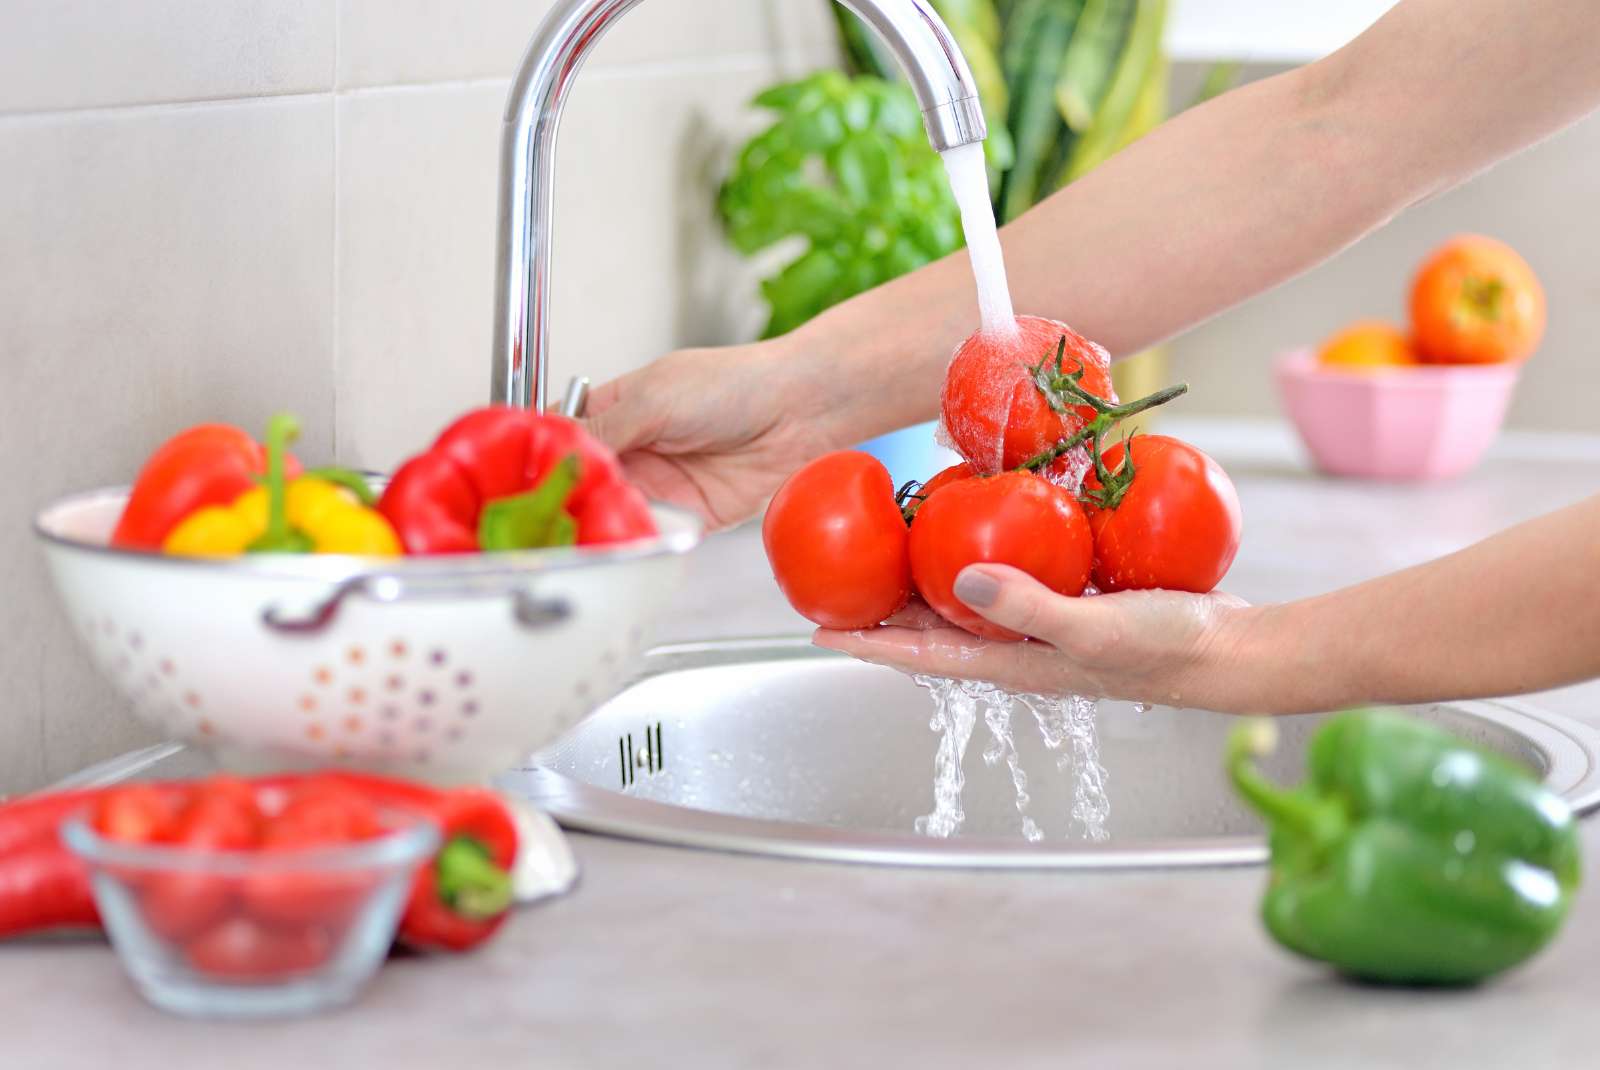 Does washing tomatoes remove pesticides?